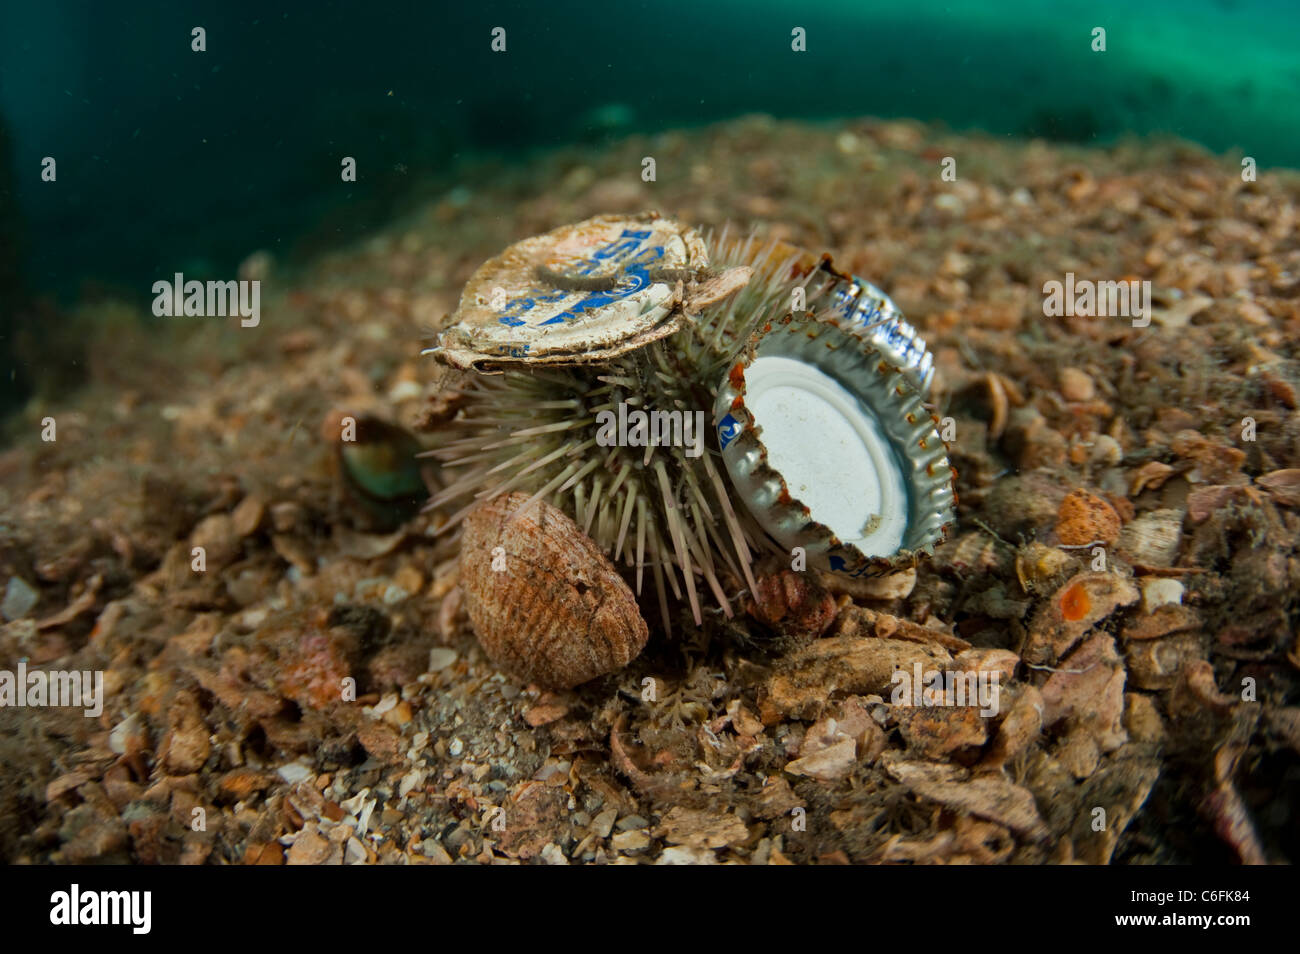 Sea Urchin, Lytechinus variegatus, with debris attached to it. Photographed in the Lake Worth Lagoon, Singer Island, Florida Stock Photo